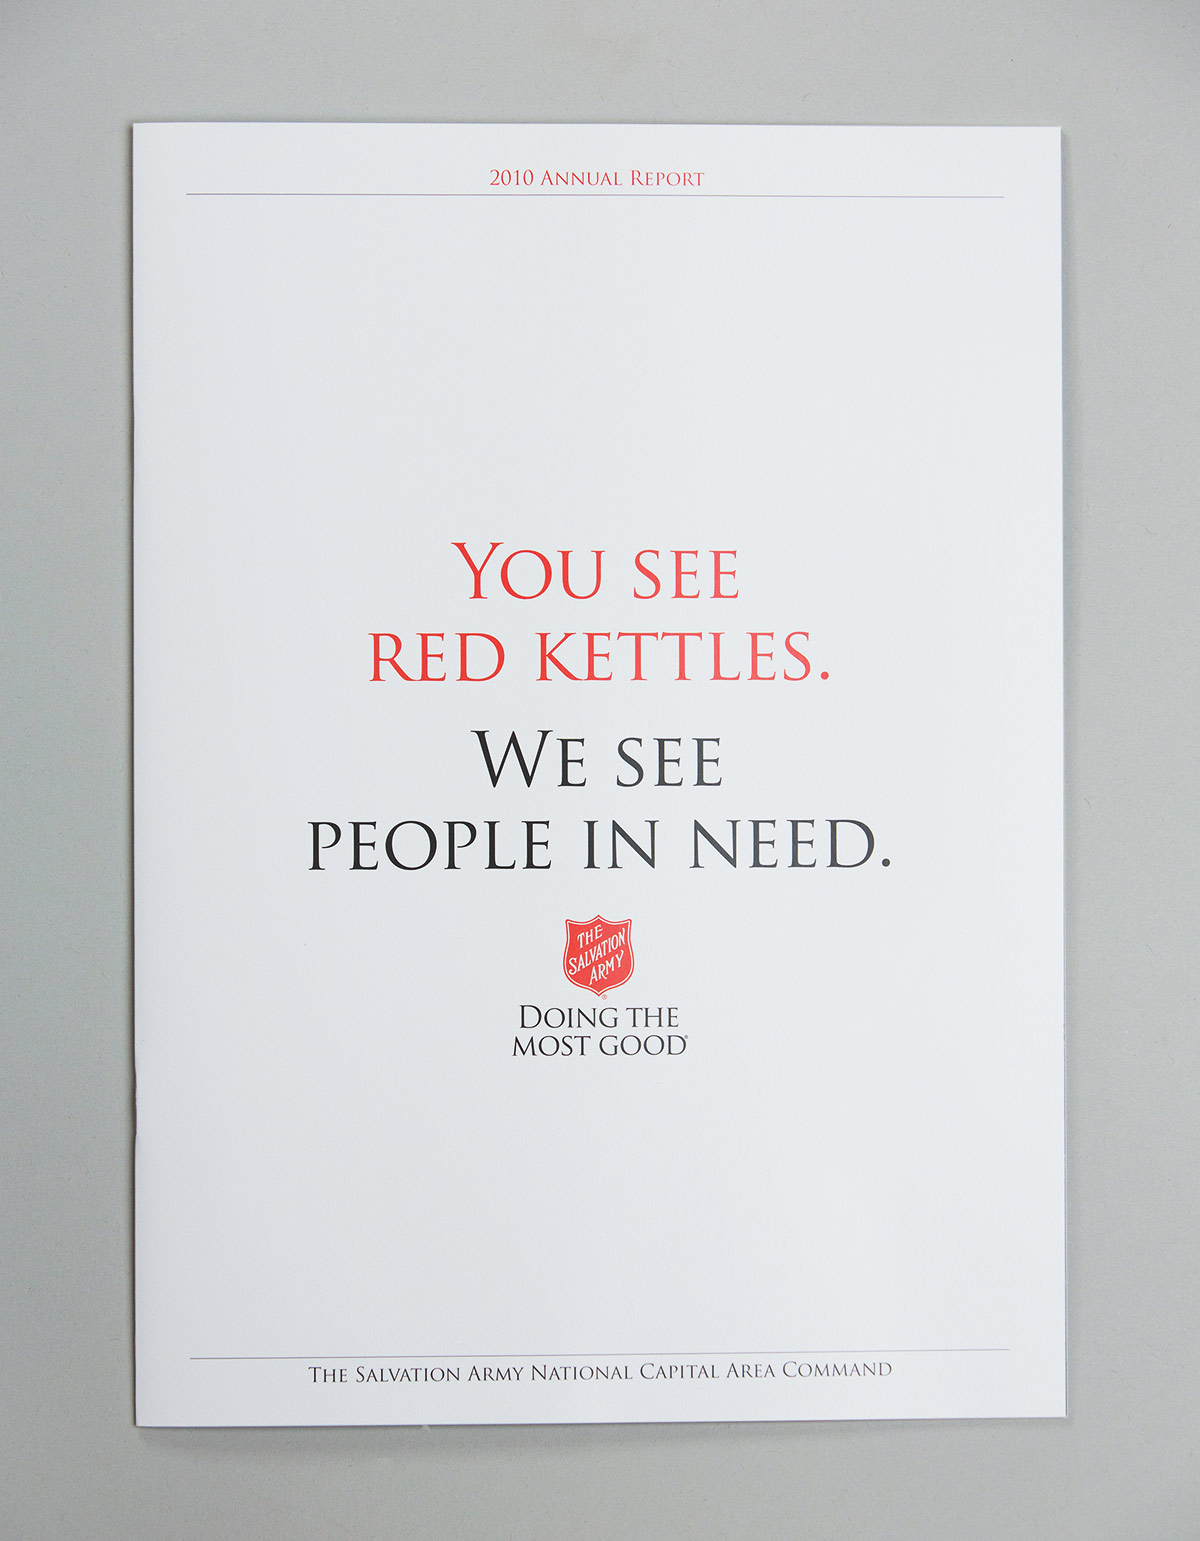 Cover design for Salvation Army annual report